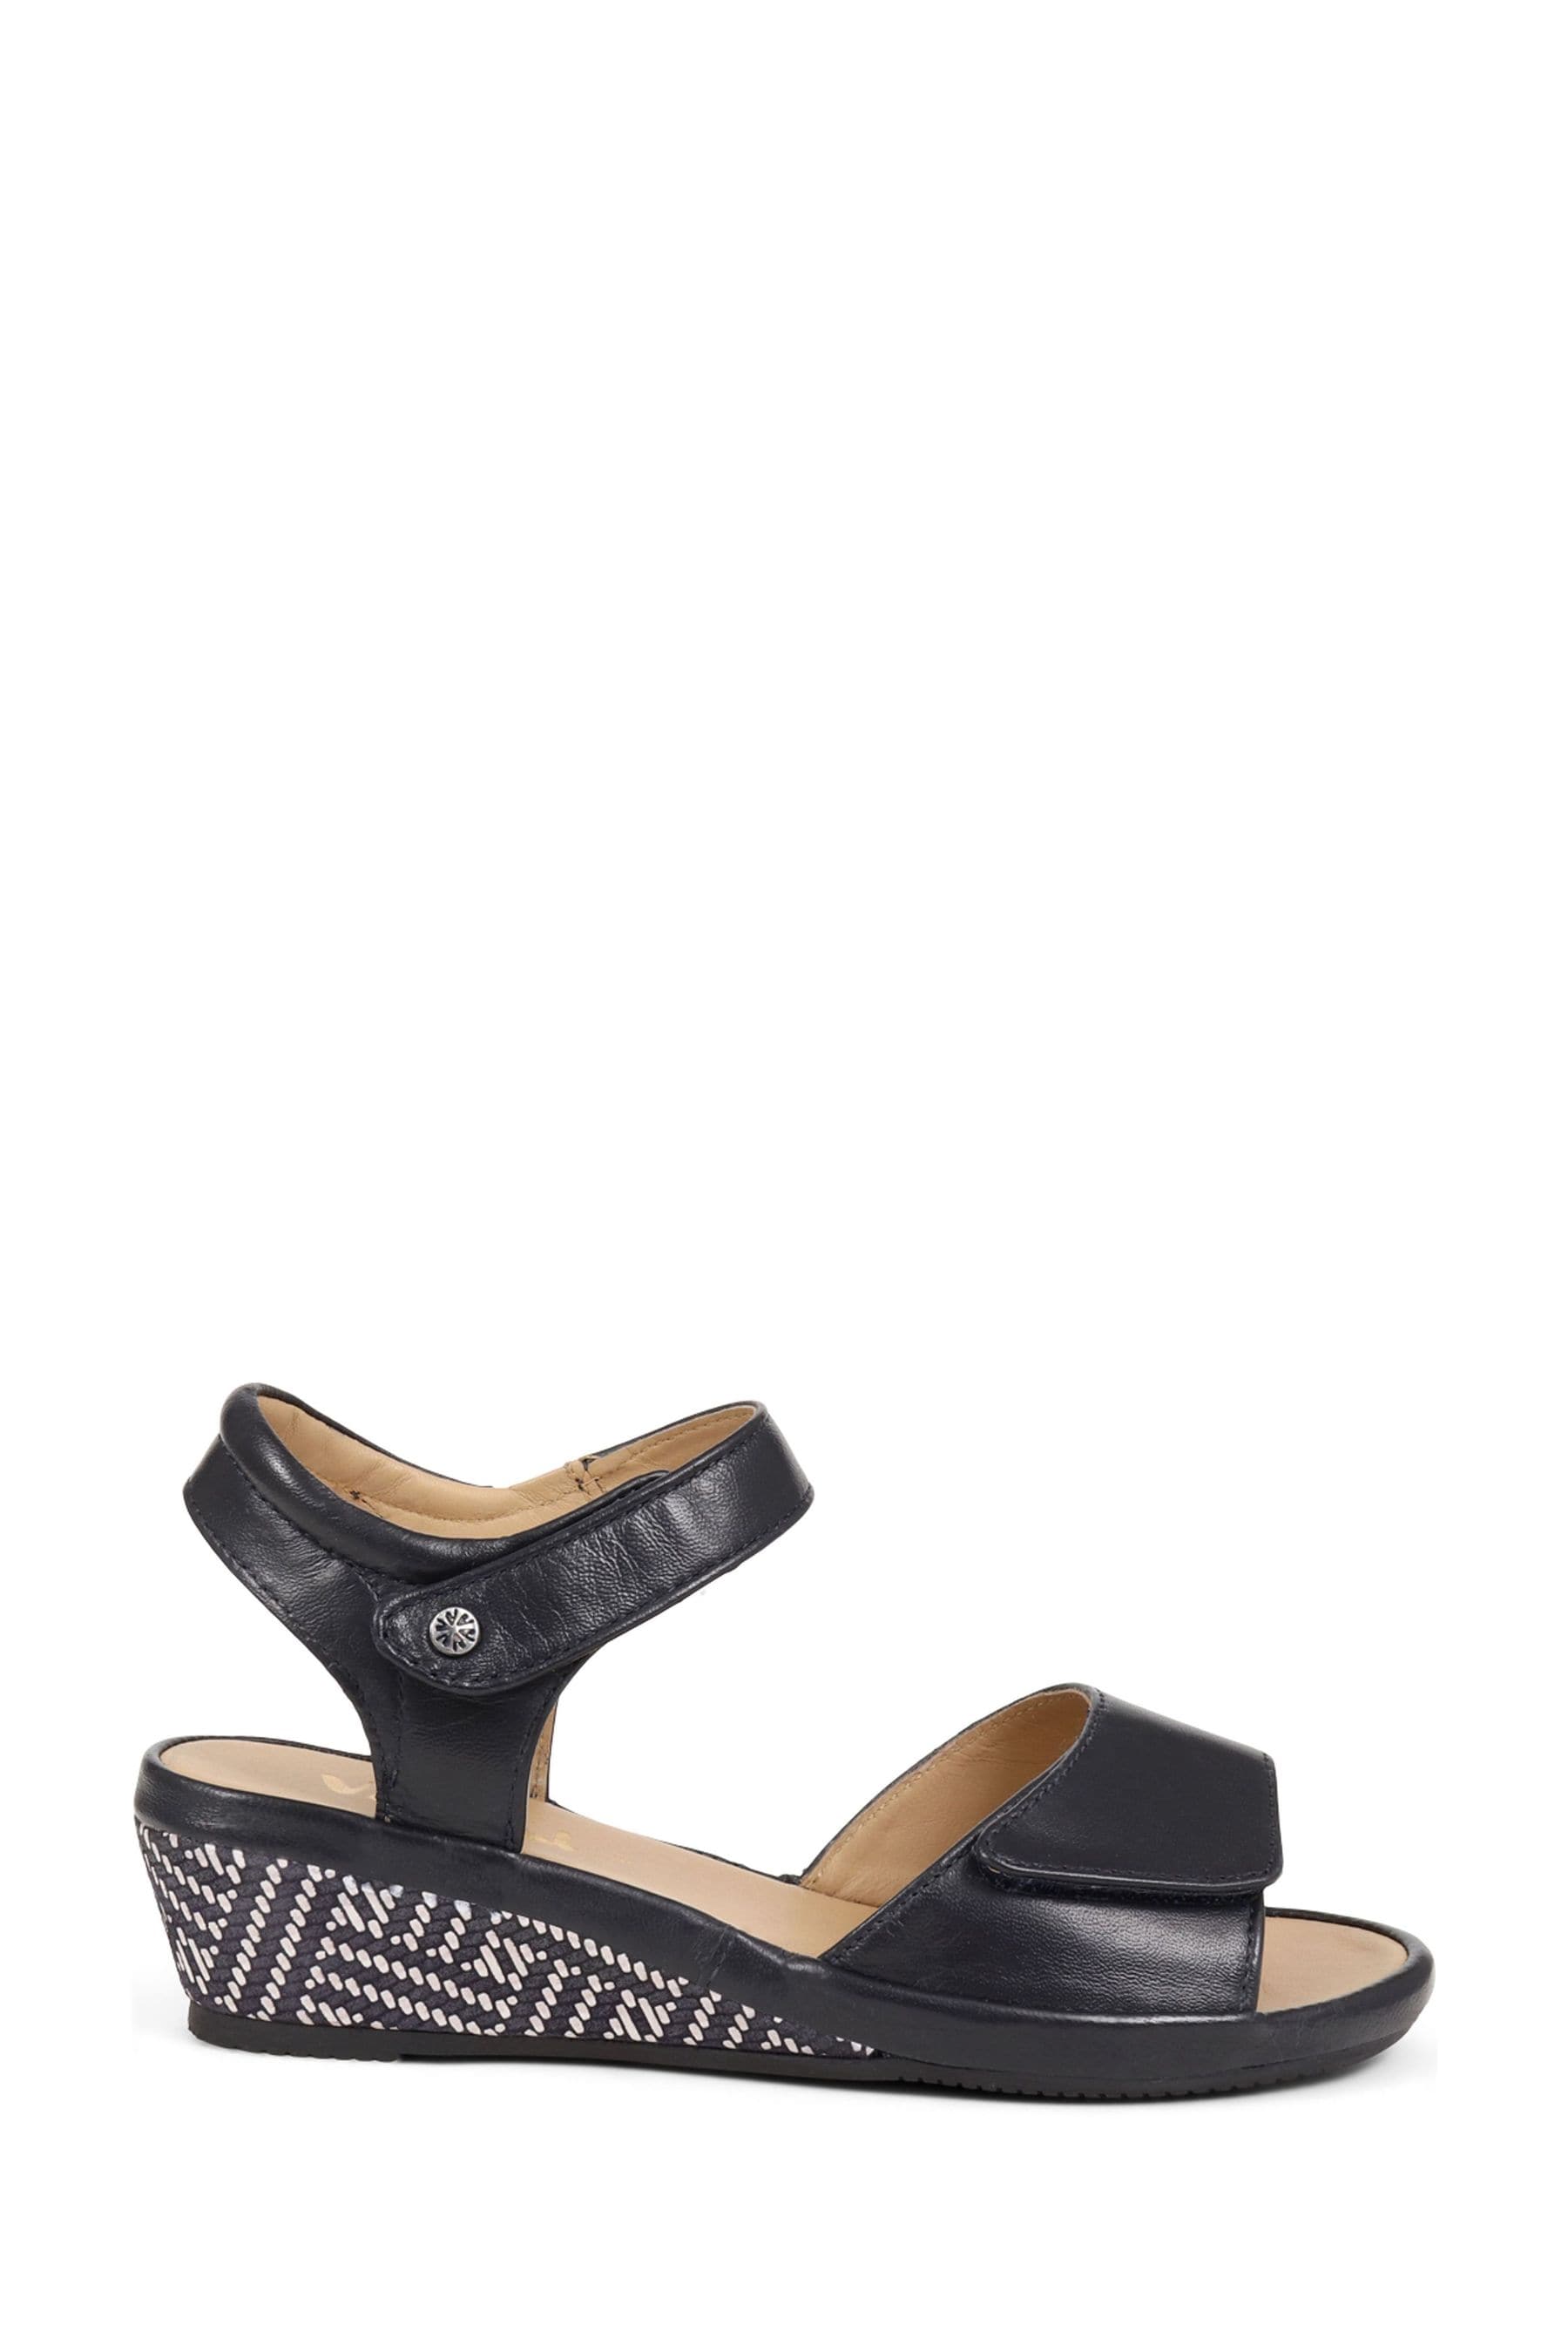 Buy Van Dal Dual Strap Leather Sandals from the Next UK online shop